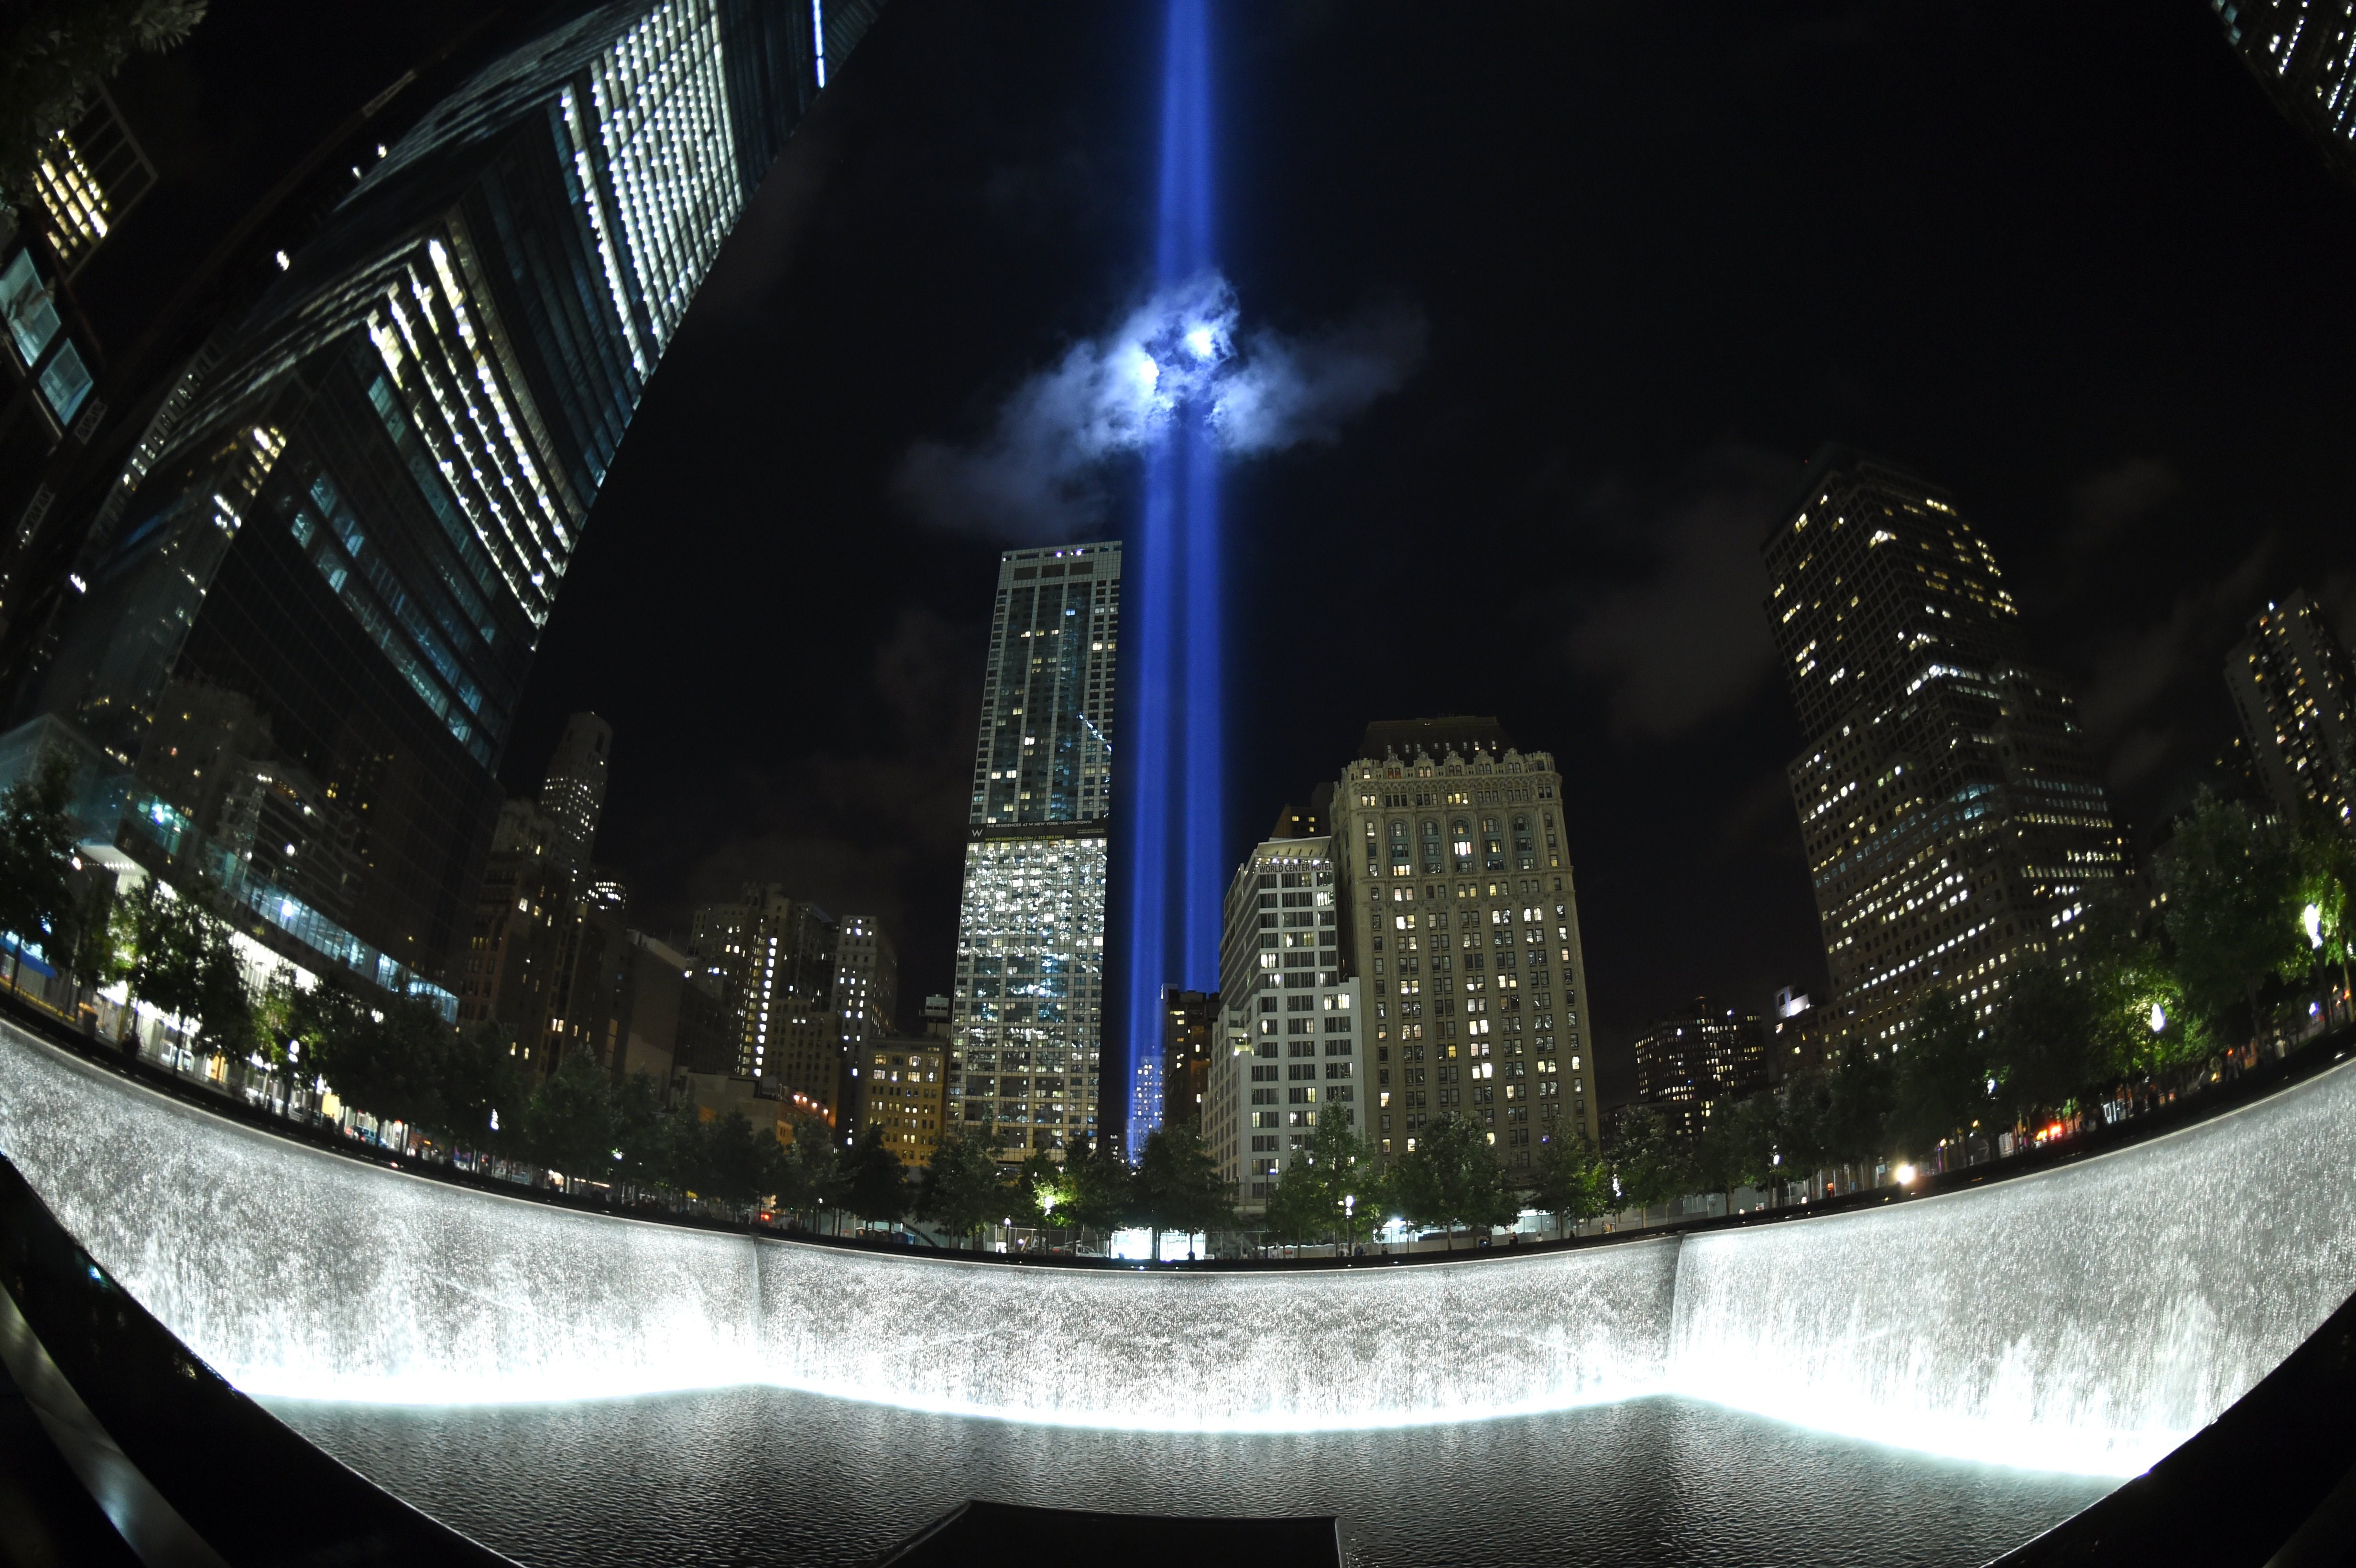 The Tribute in Light illuminates the sky  behind the  9/11 Memorial waterfalls and reflecting pool in New York on September 10, 2014 marking the 13th anniversary of the September 11, 2001 attacks. The tribute, an art installation of the Municipal Art Society, consists of 88 searchlights placed next to the site of the World Trade Center creating two vertical columns of light in remembrance of the 2001 attacks.  Photo: Timothy A. Clary/AFP/Getty Images.